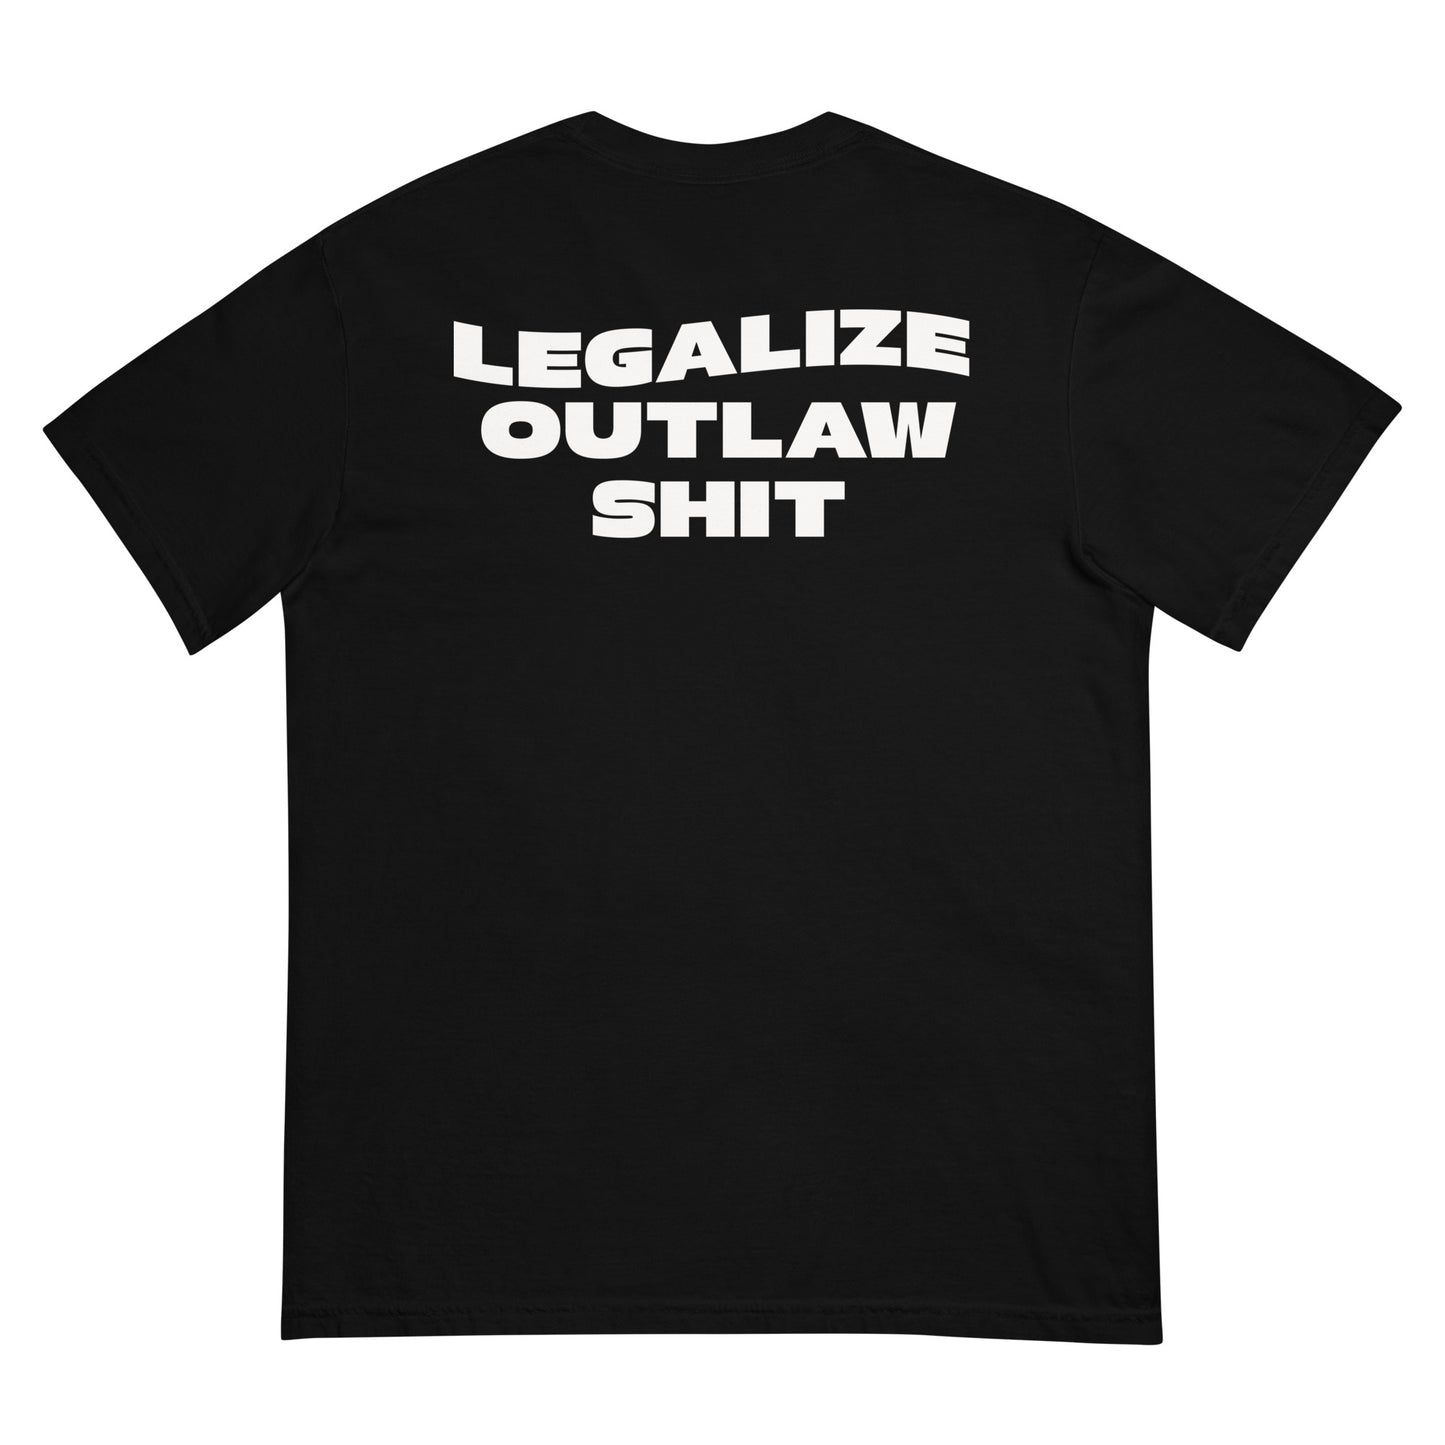 Legalize Outlaw Shit T-Shirt